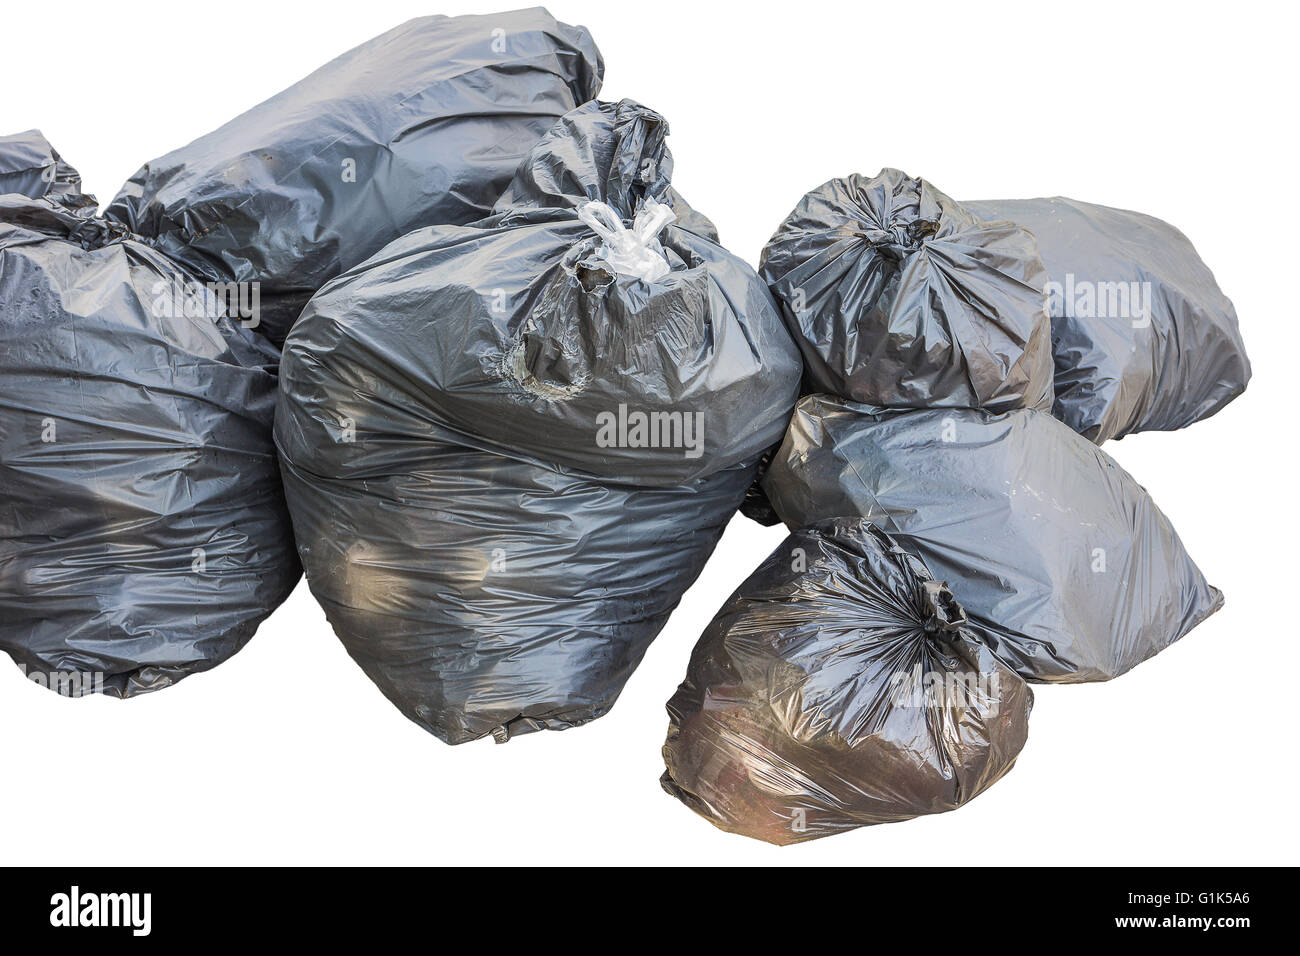 Trash Bag Isolated On A White Background Stock Photo - Download